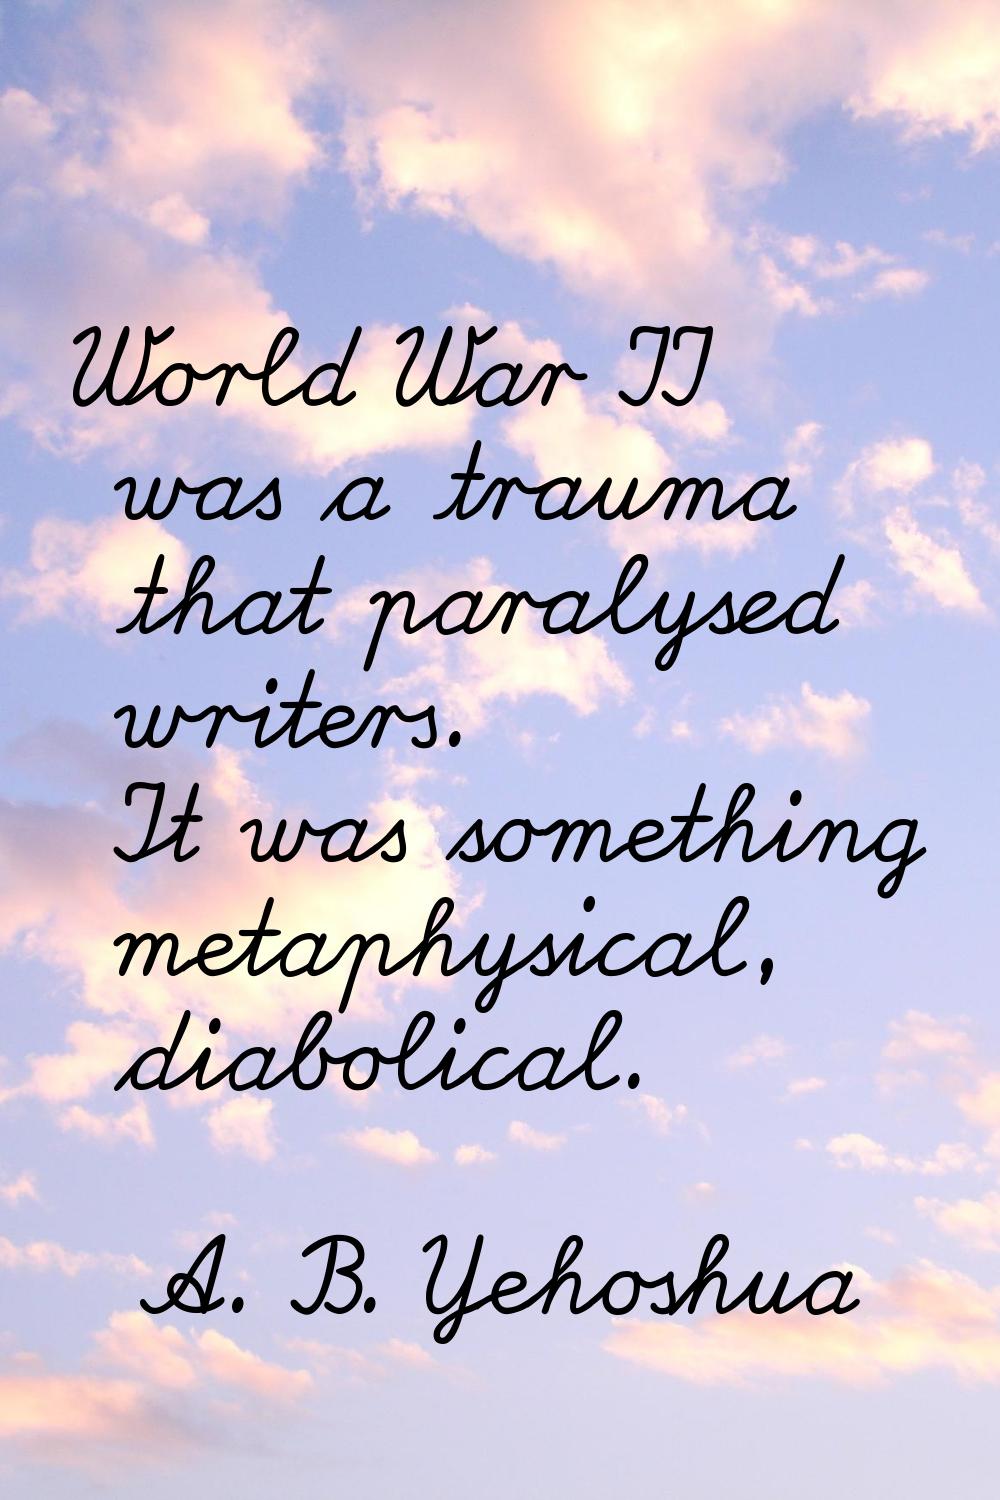 World War II was a trauma that paralysed writers. It was something metaphysical, diabolical.